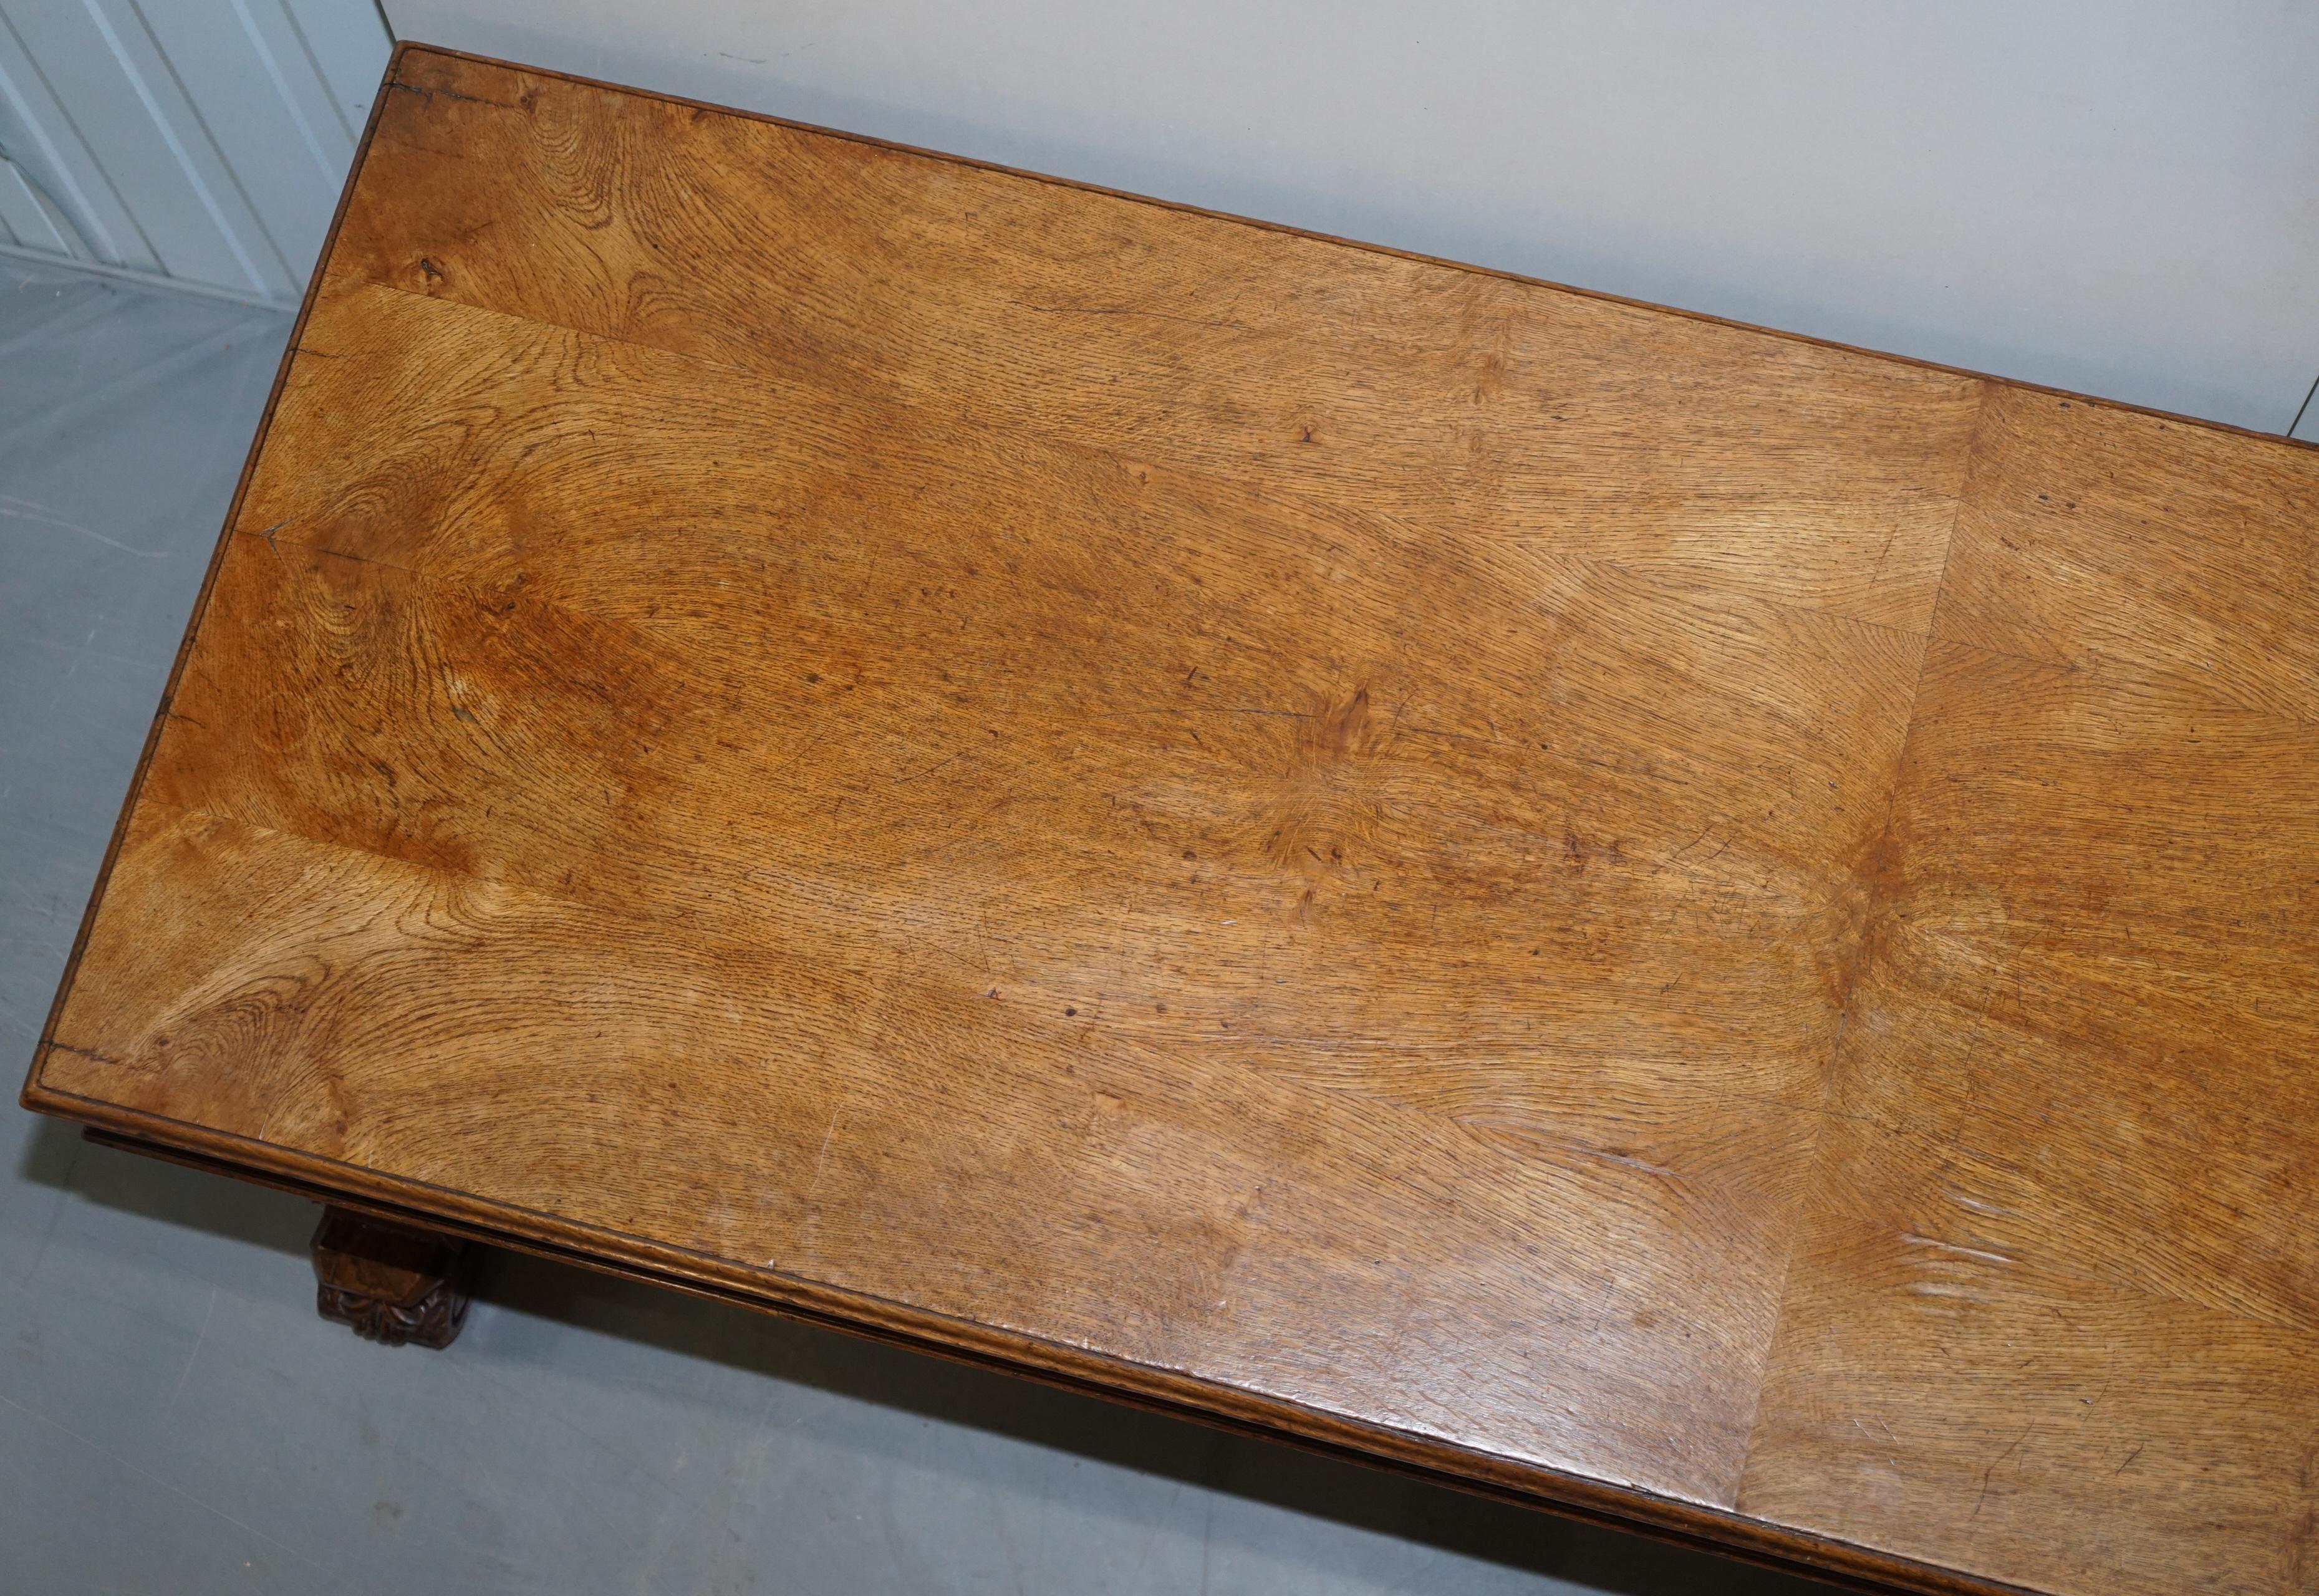 Late 19th Century Antique Howard & Son's Pollard Oak Refectory Dining Serving Table Fully Stamped